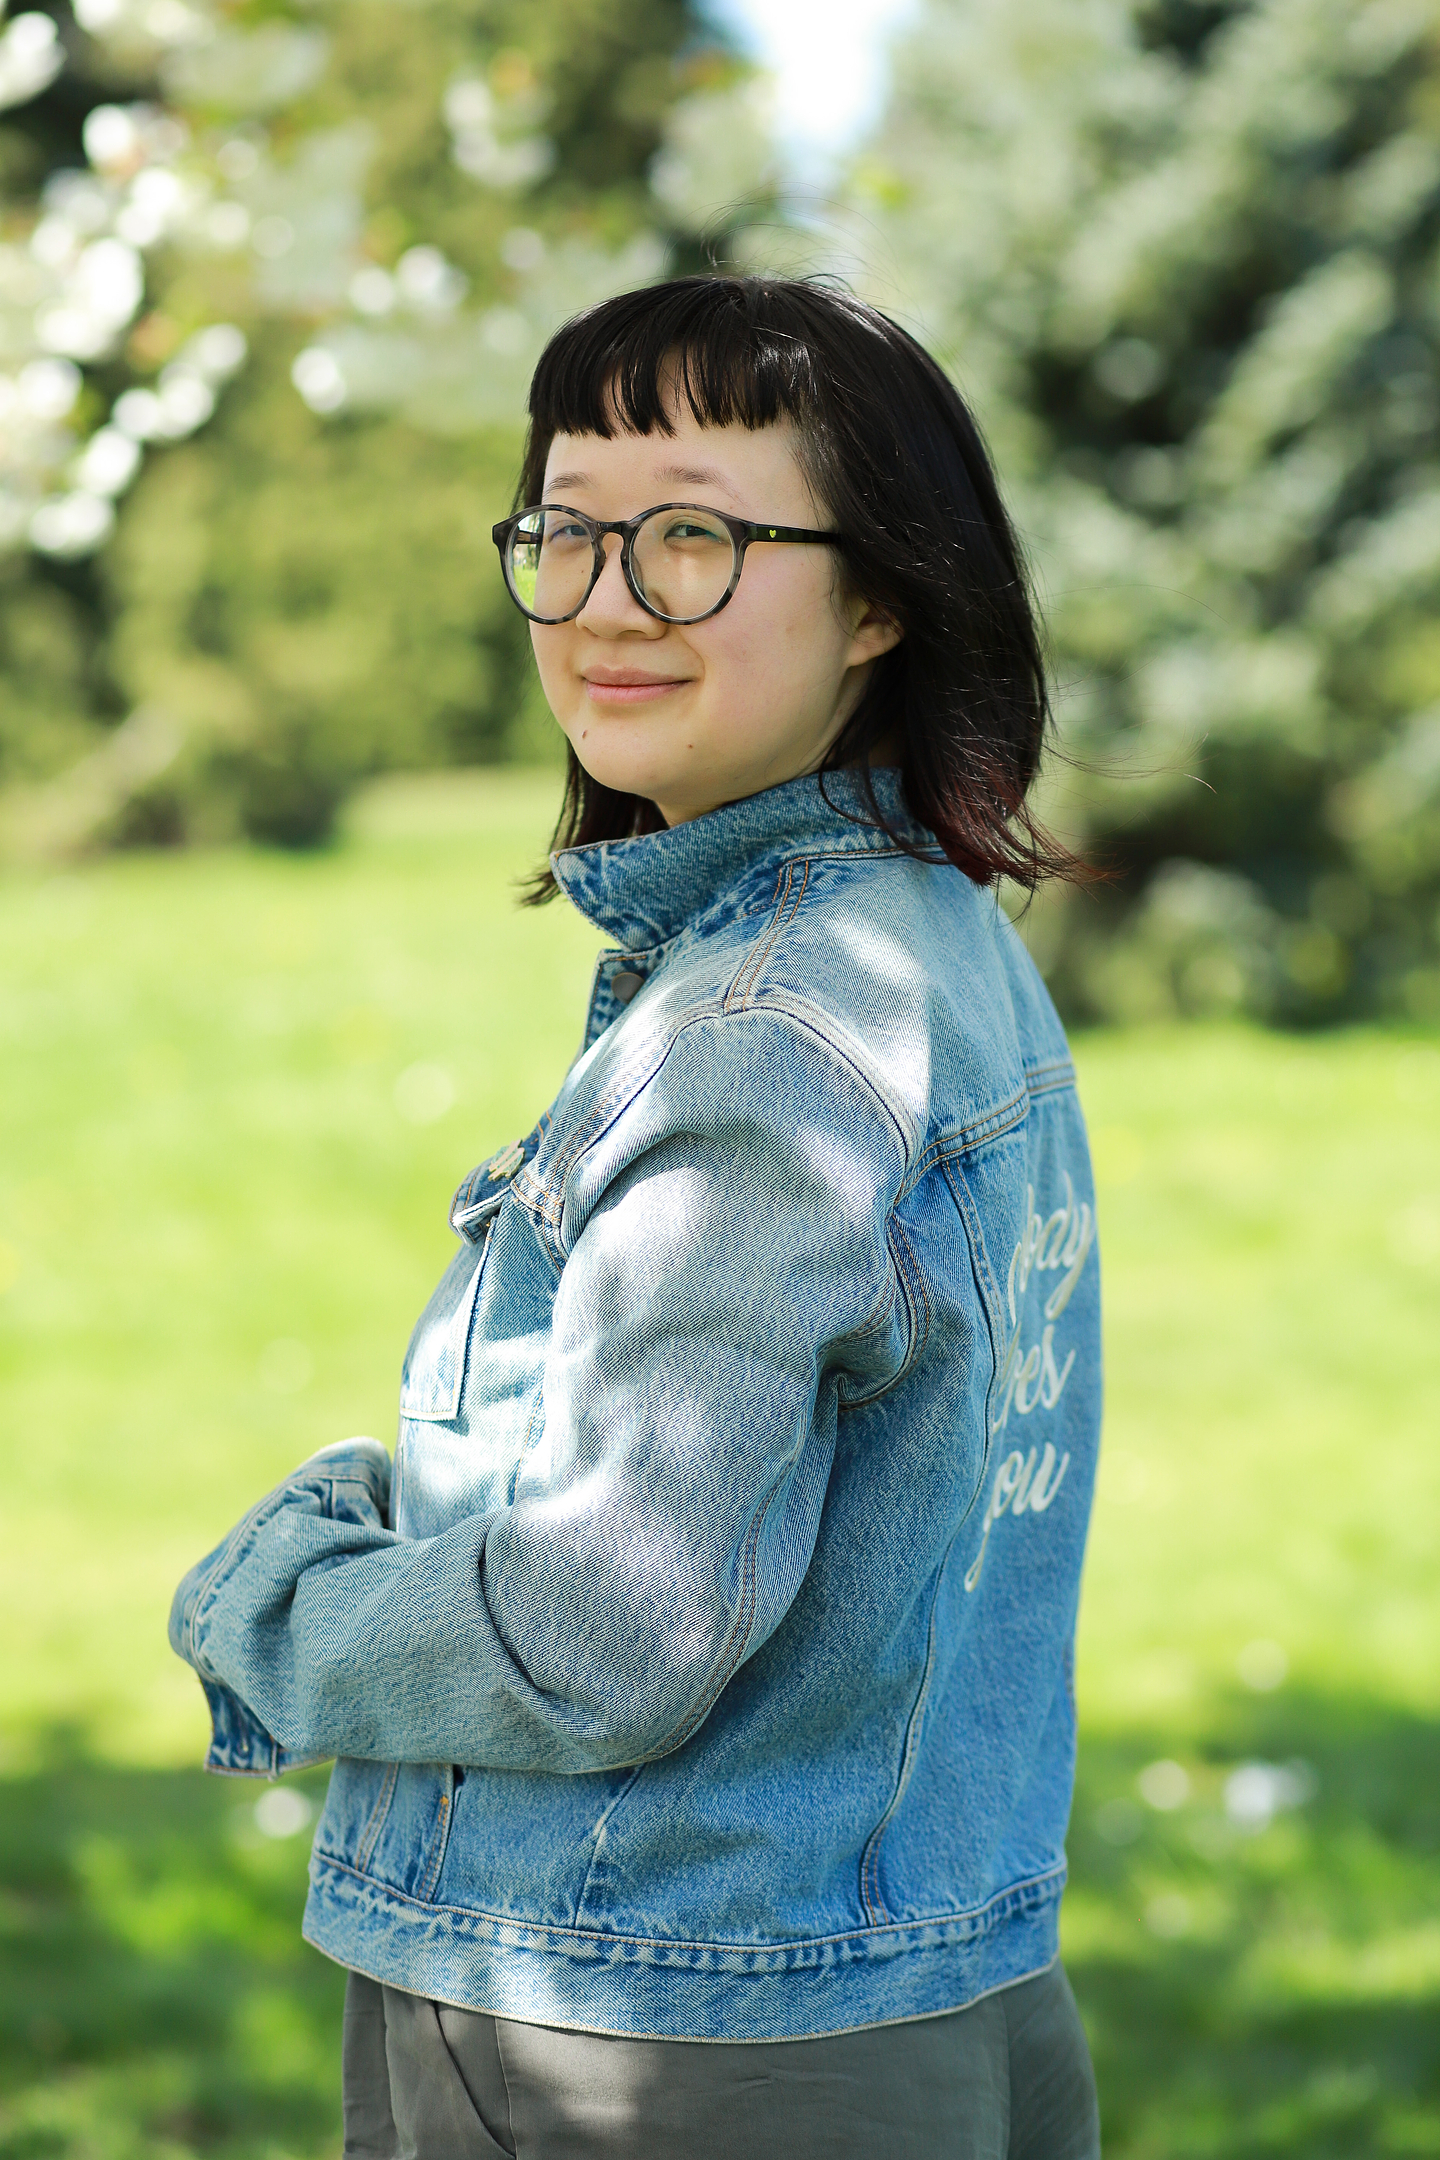 Jane Shi stands outside and looks over her shoulder to smile at the camera. She wears a denim jacket with text embroidered on the back. In the background lush grass and green foliage can be seen out of focus.